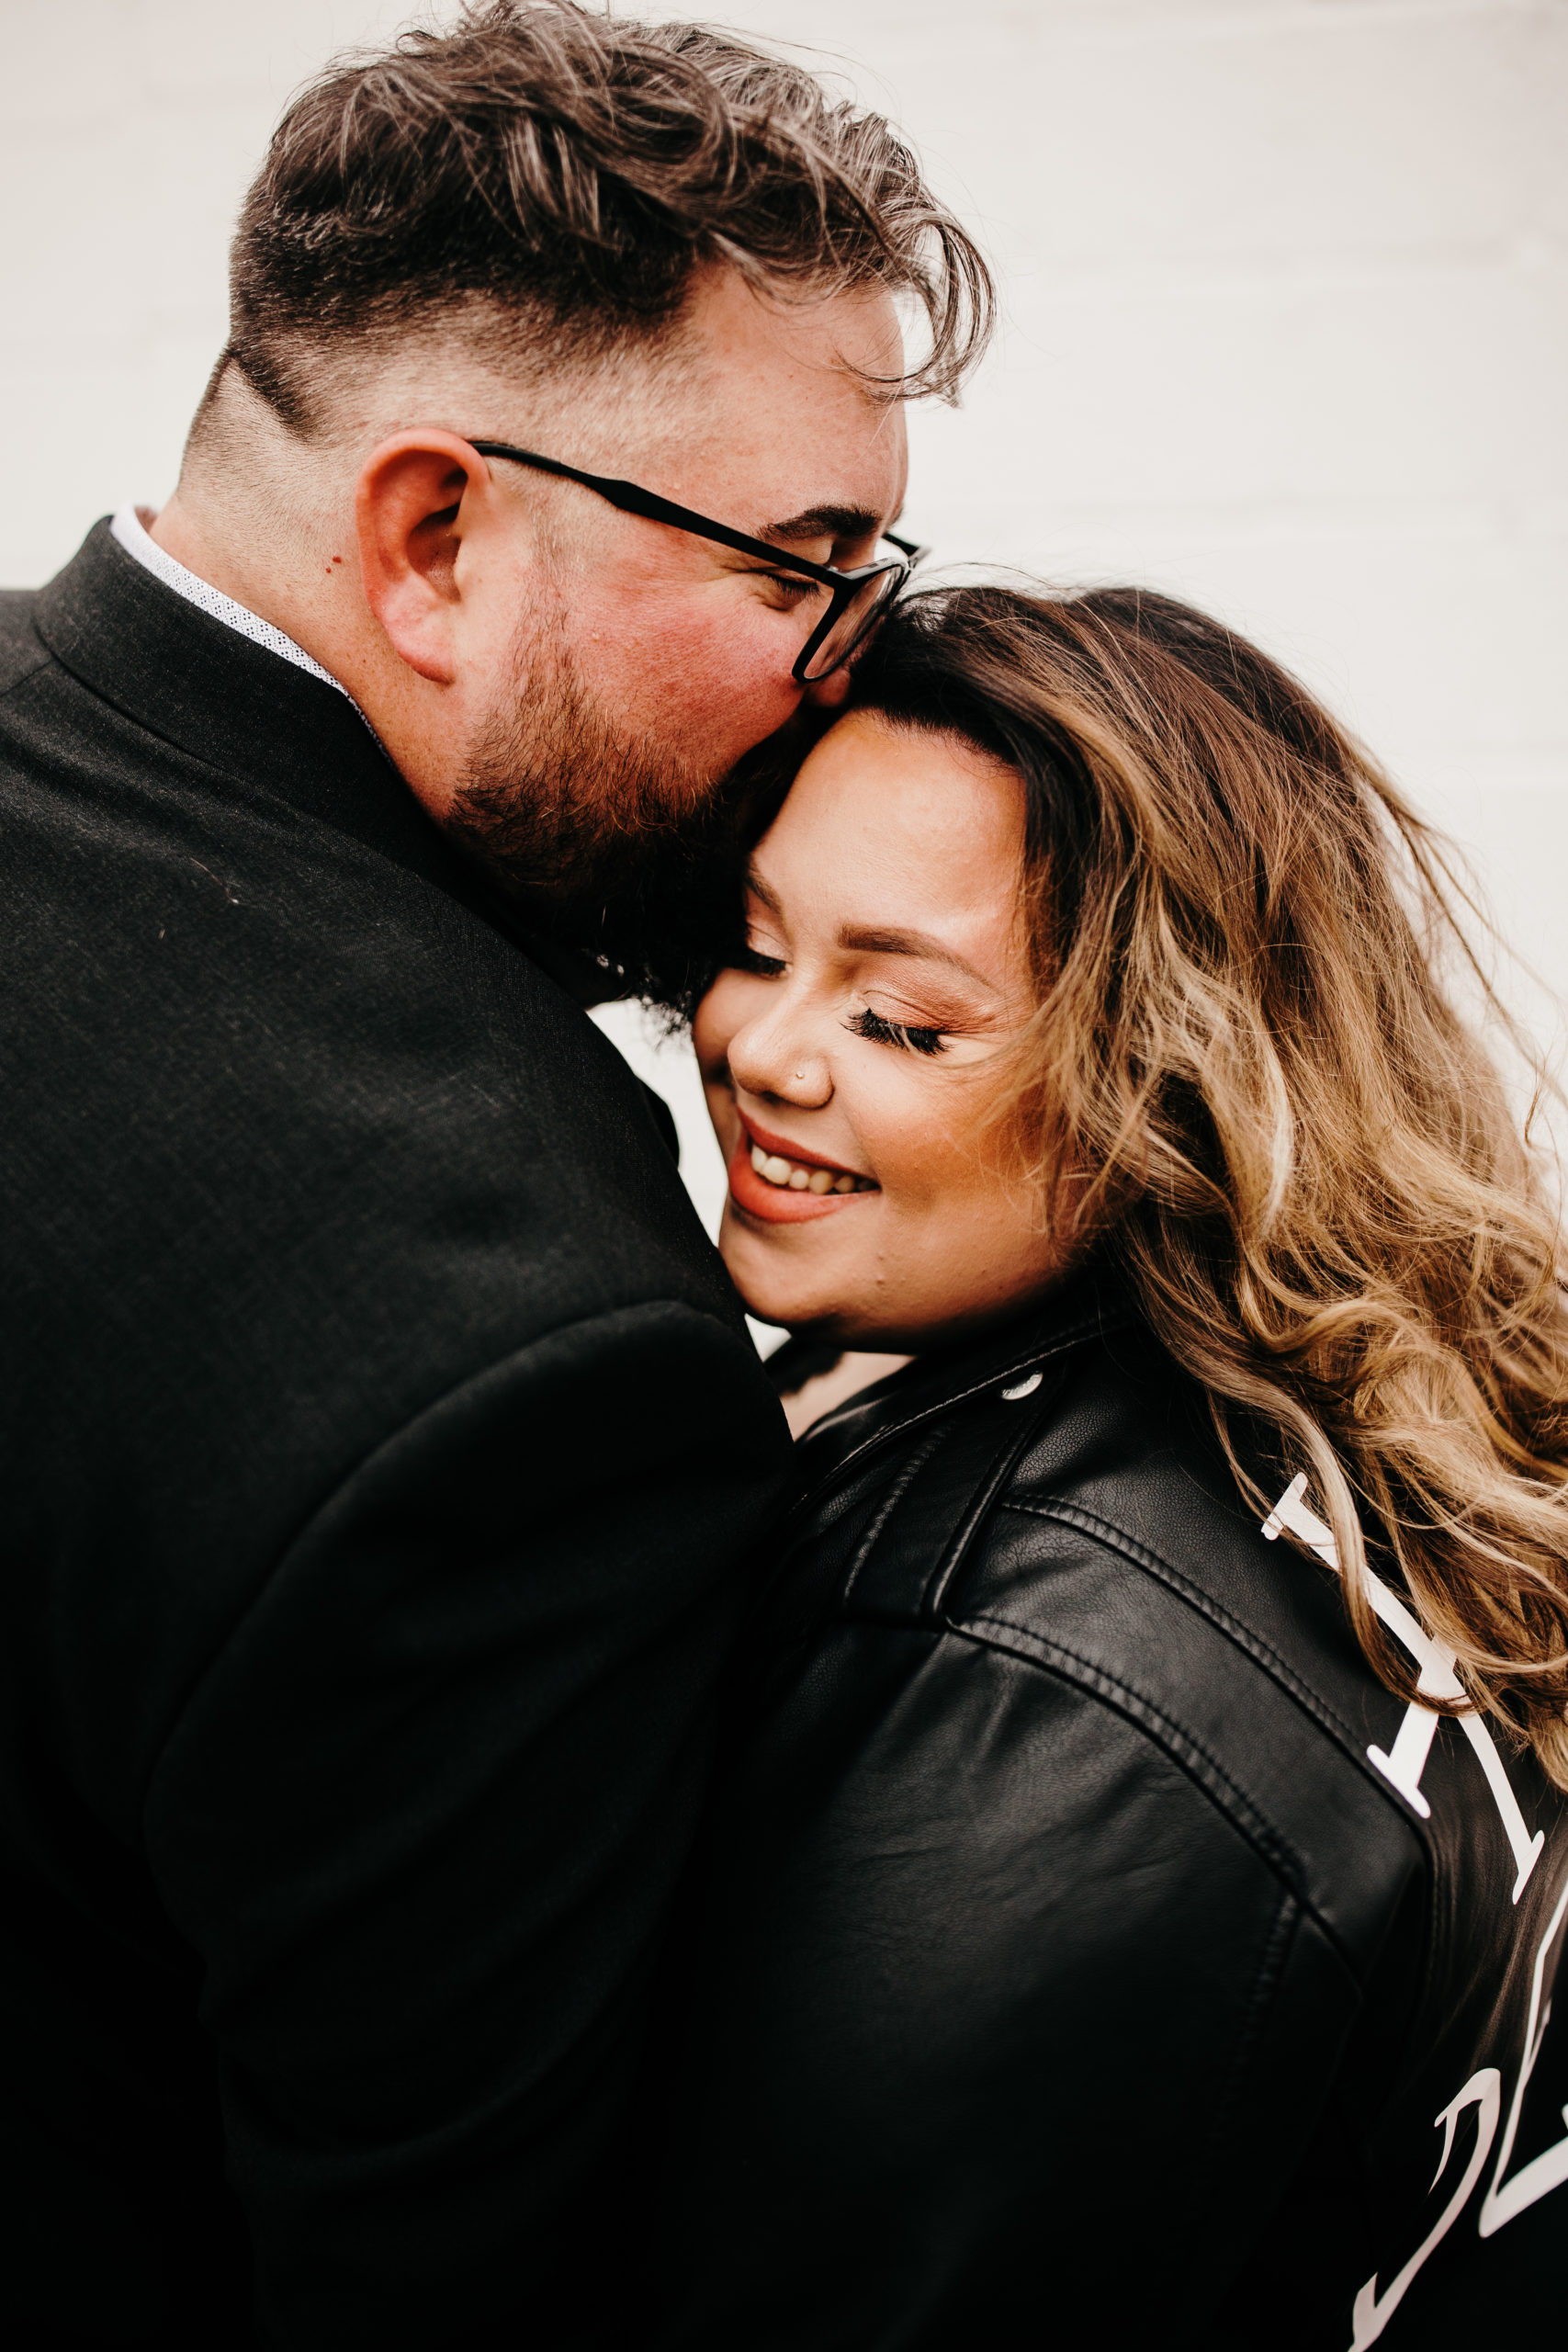 cape may winter elopement